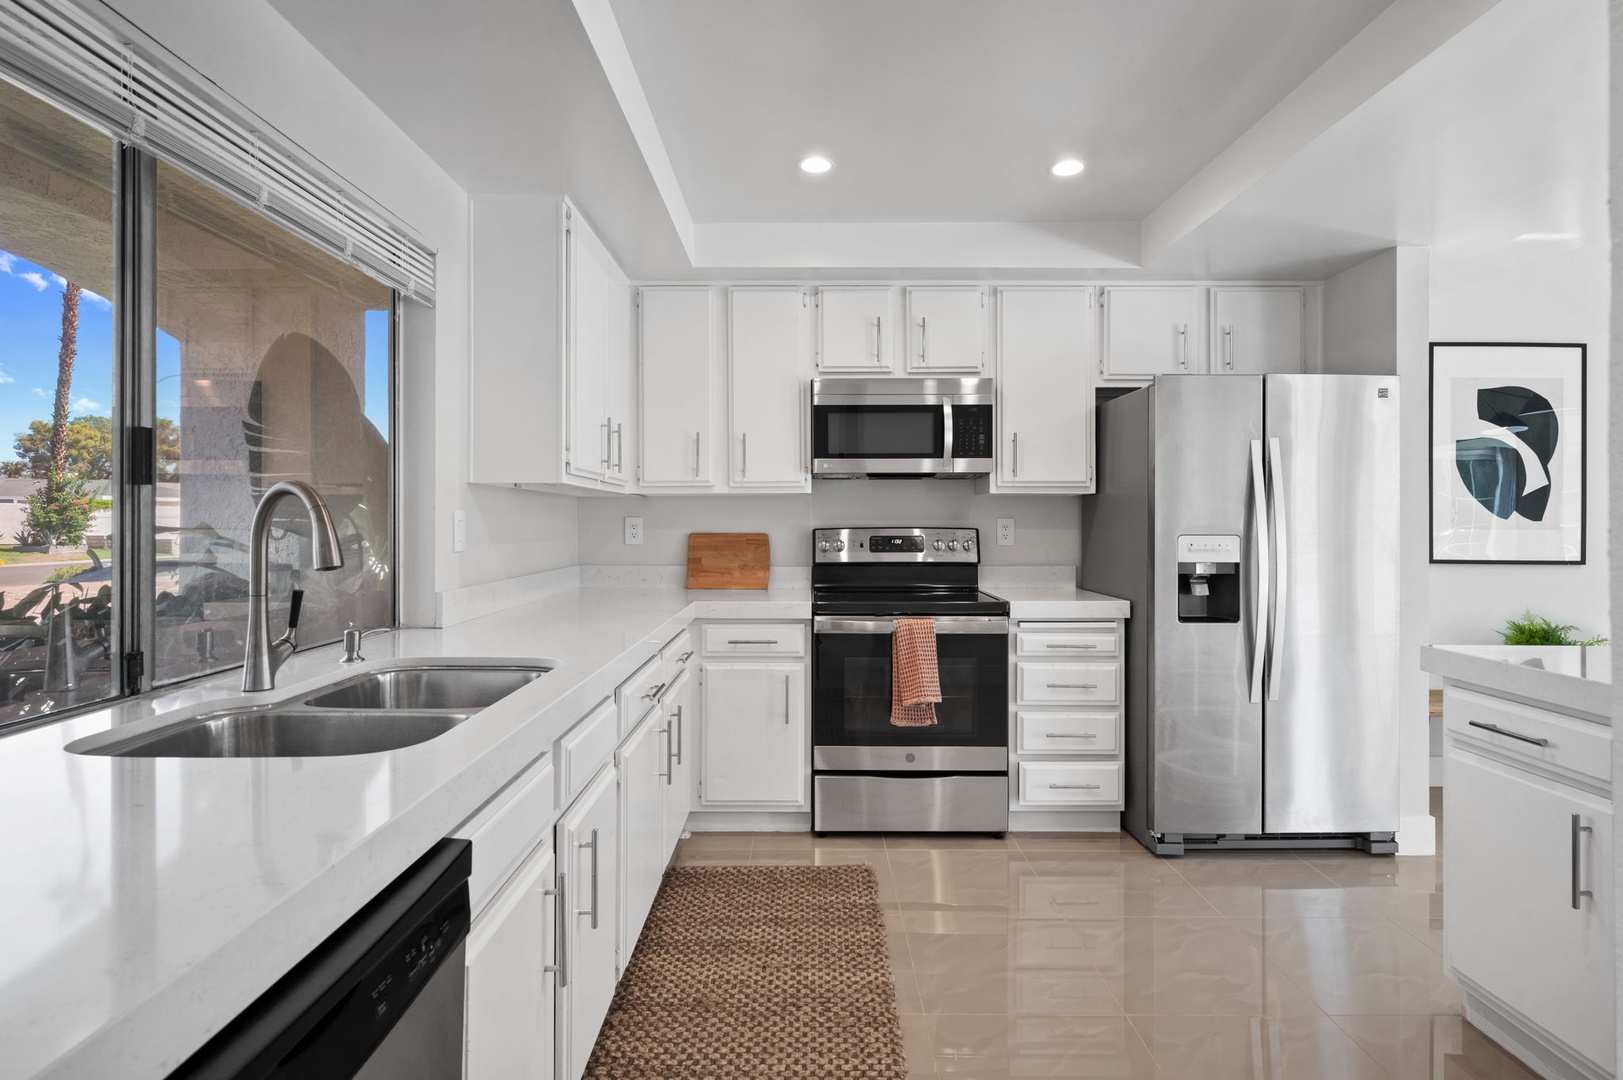 Enjoy all the comforts of home & ample storage/counter space in the kitchen